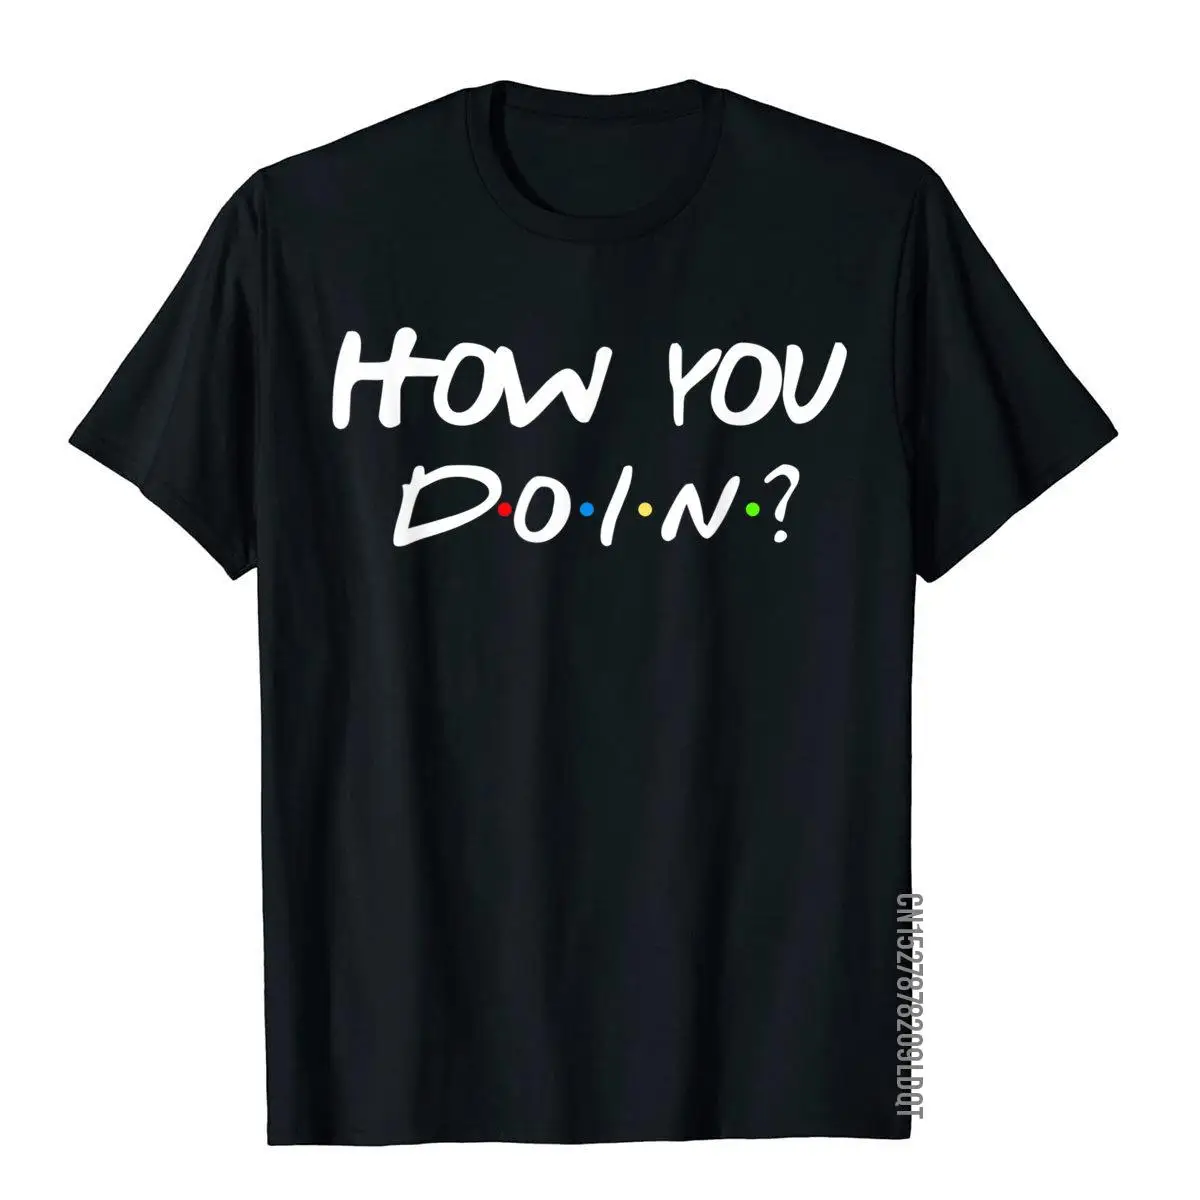 How You Doin Best Friend Gift T-Shirt Cotton Hip Hop Tops Shirts New Arrival Men's Top T-Shirts Funny